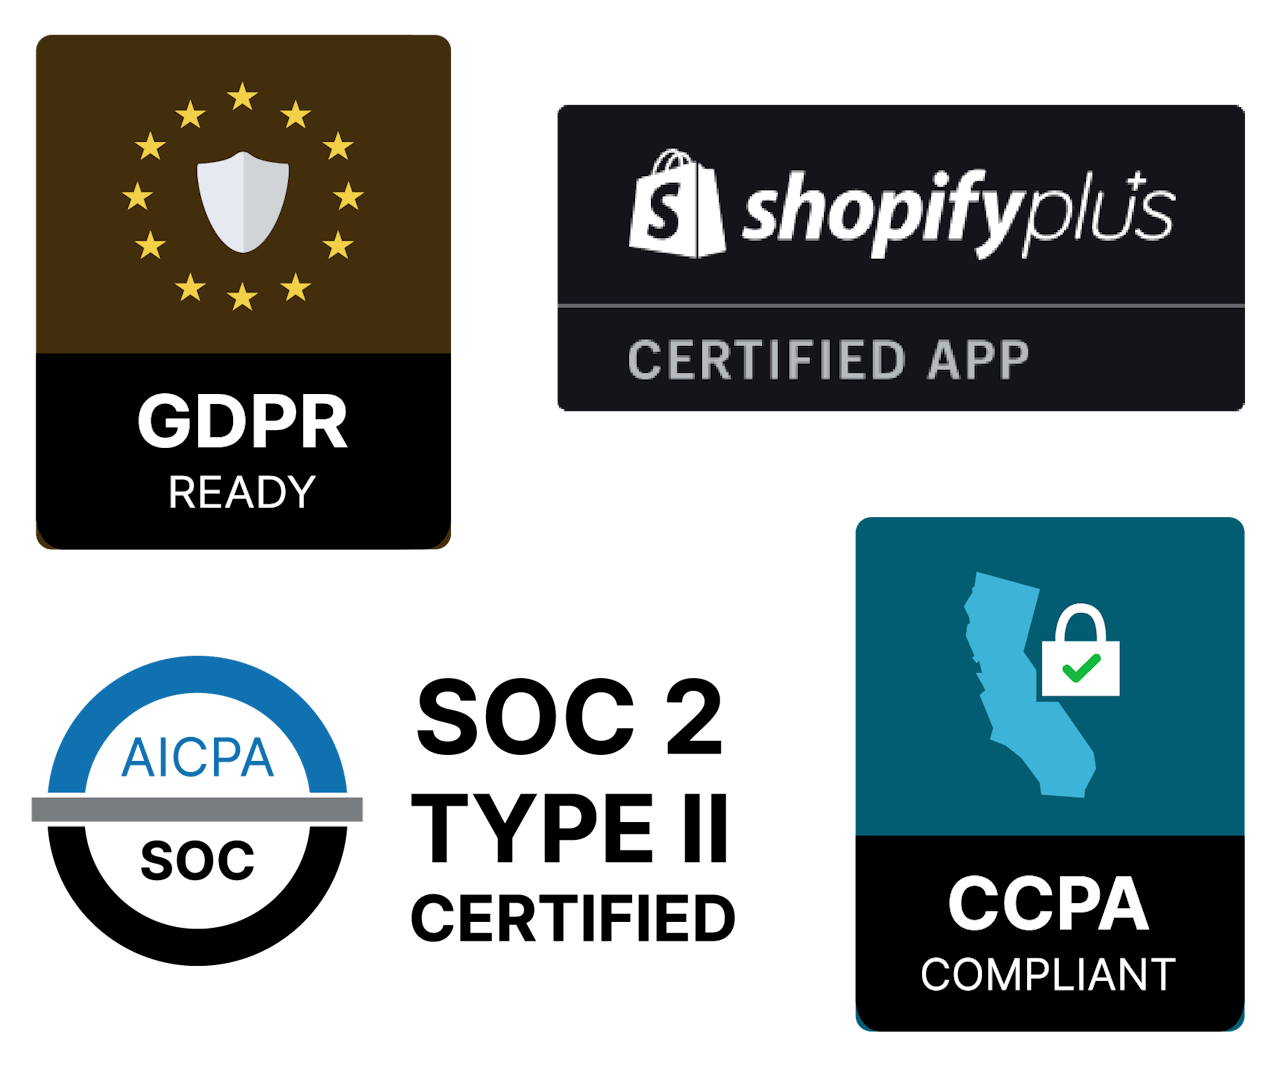 Endear is Shopify Plus certified as well as GDPR, CCPA, and SOC2 compliant